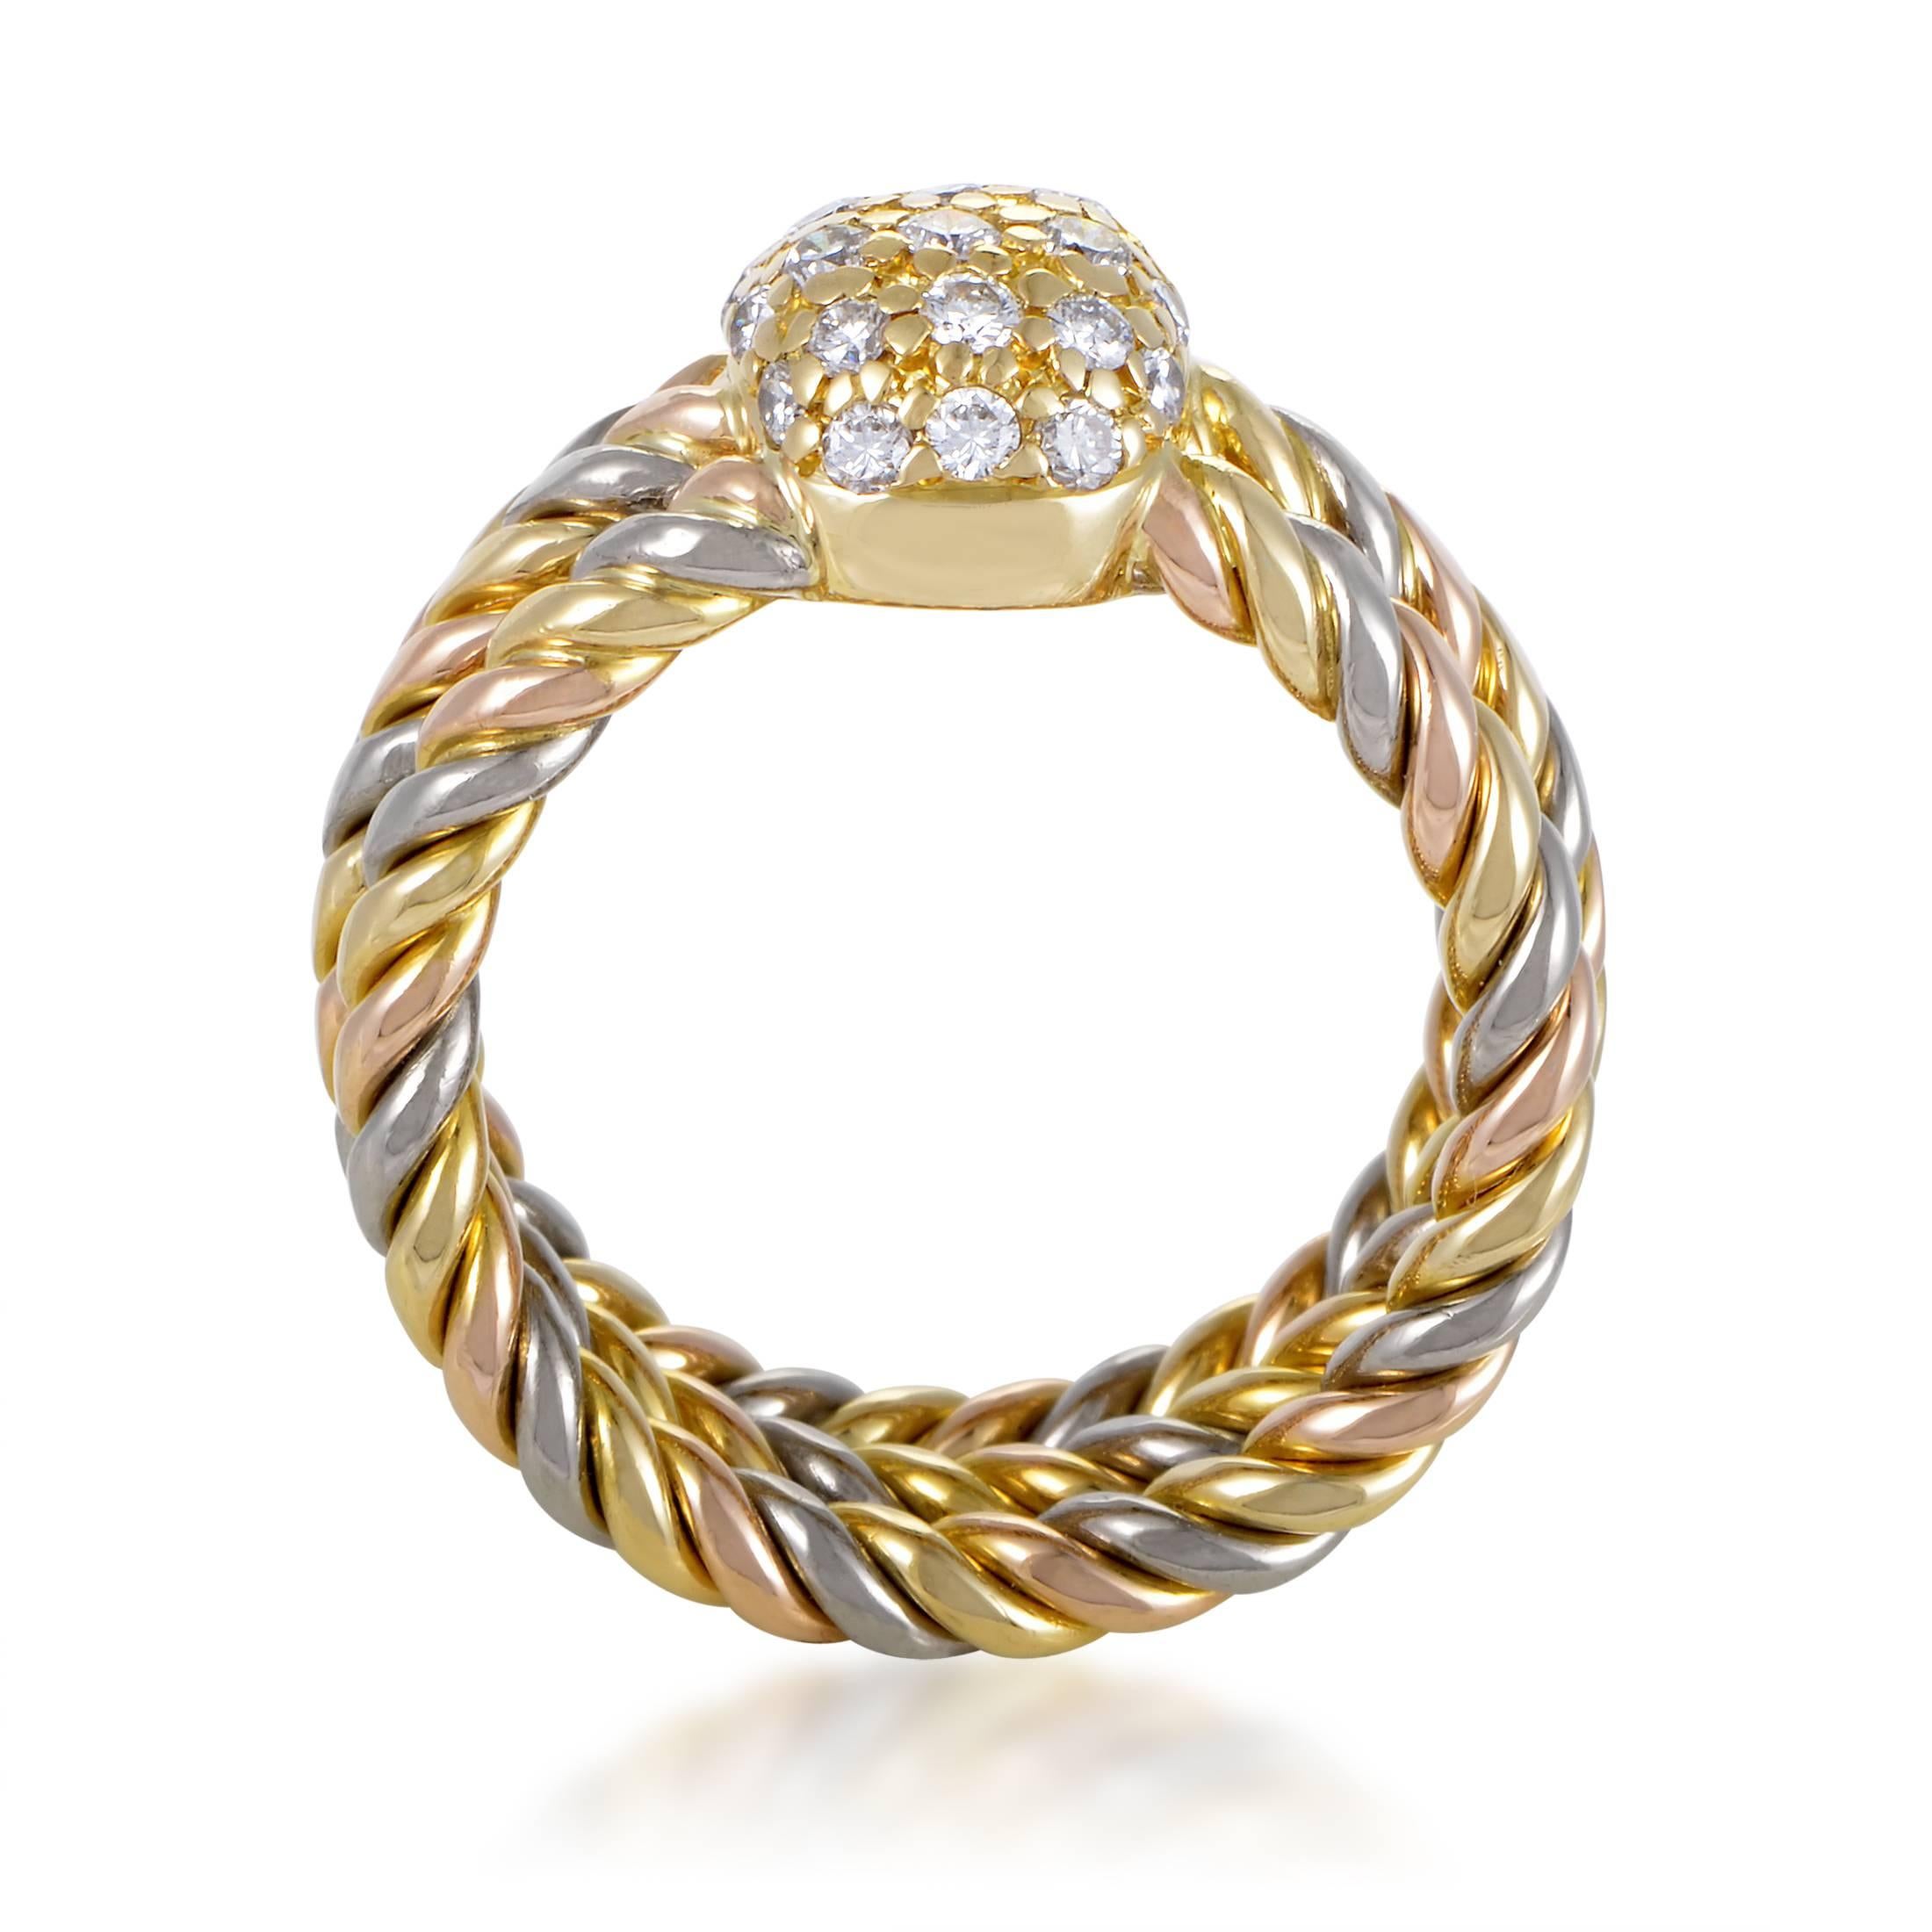 This ring from Cartier is a stunning combination of a precious stone and metals. Yellow, white and rose gold spin like rope to shape the 8mm wide band. Their united rotation peaks with a broad setting of 0.50ct diamond that reaches 6mm high and